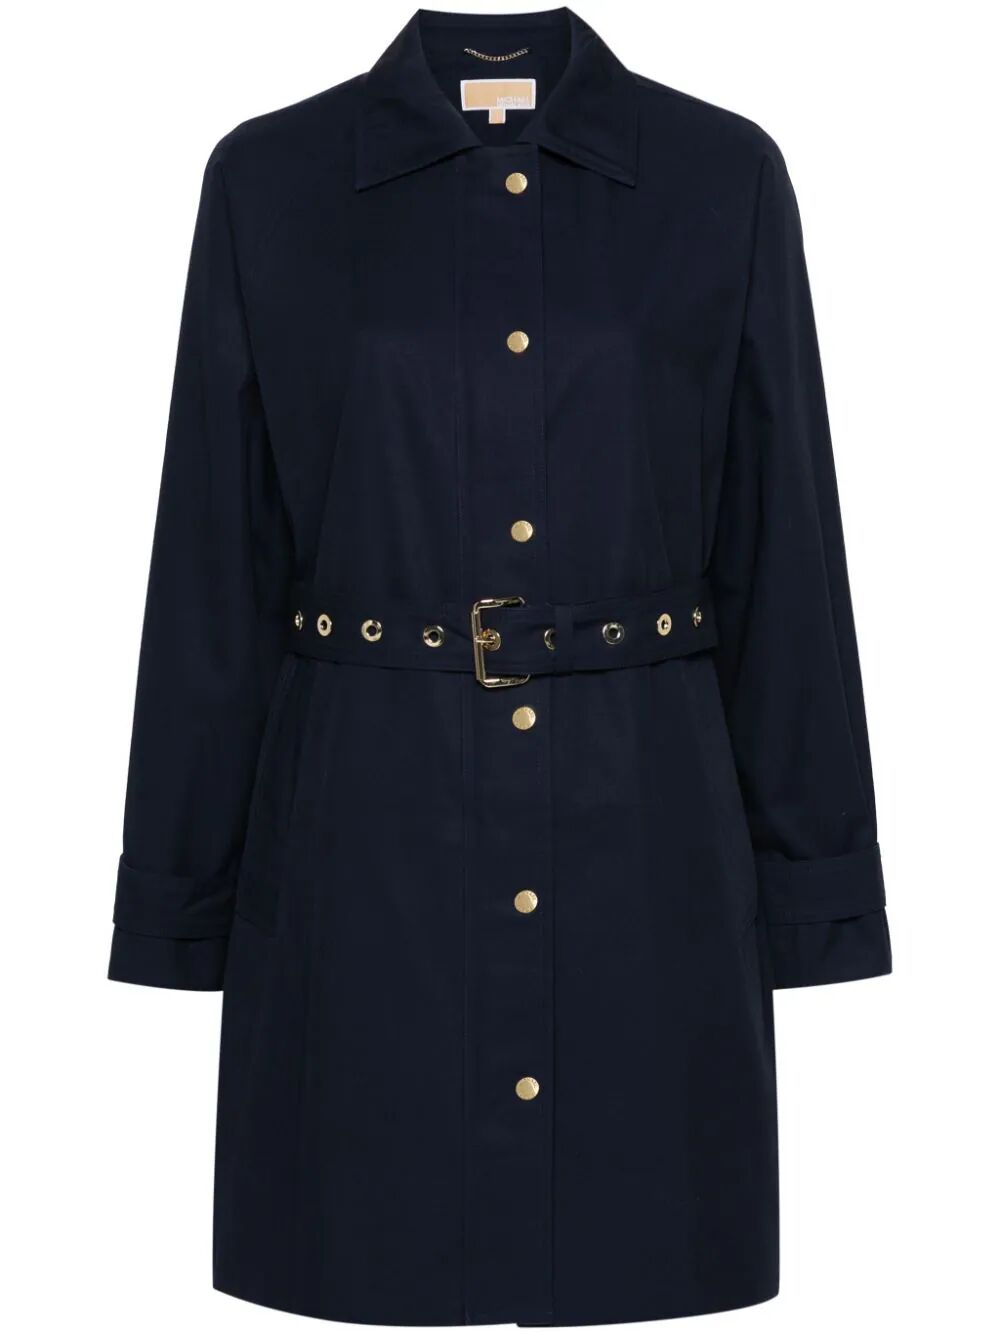 Belted Trench